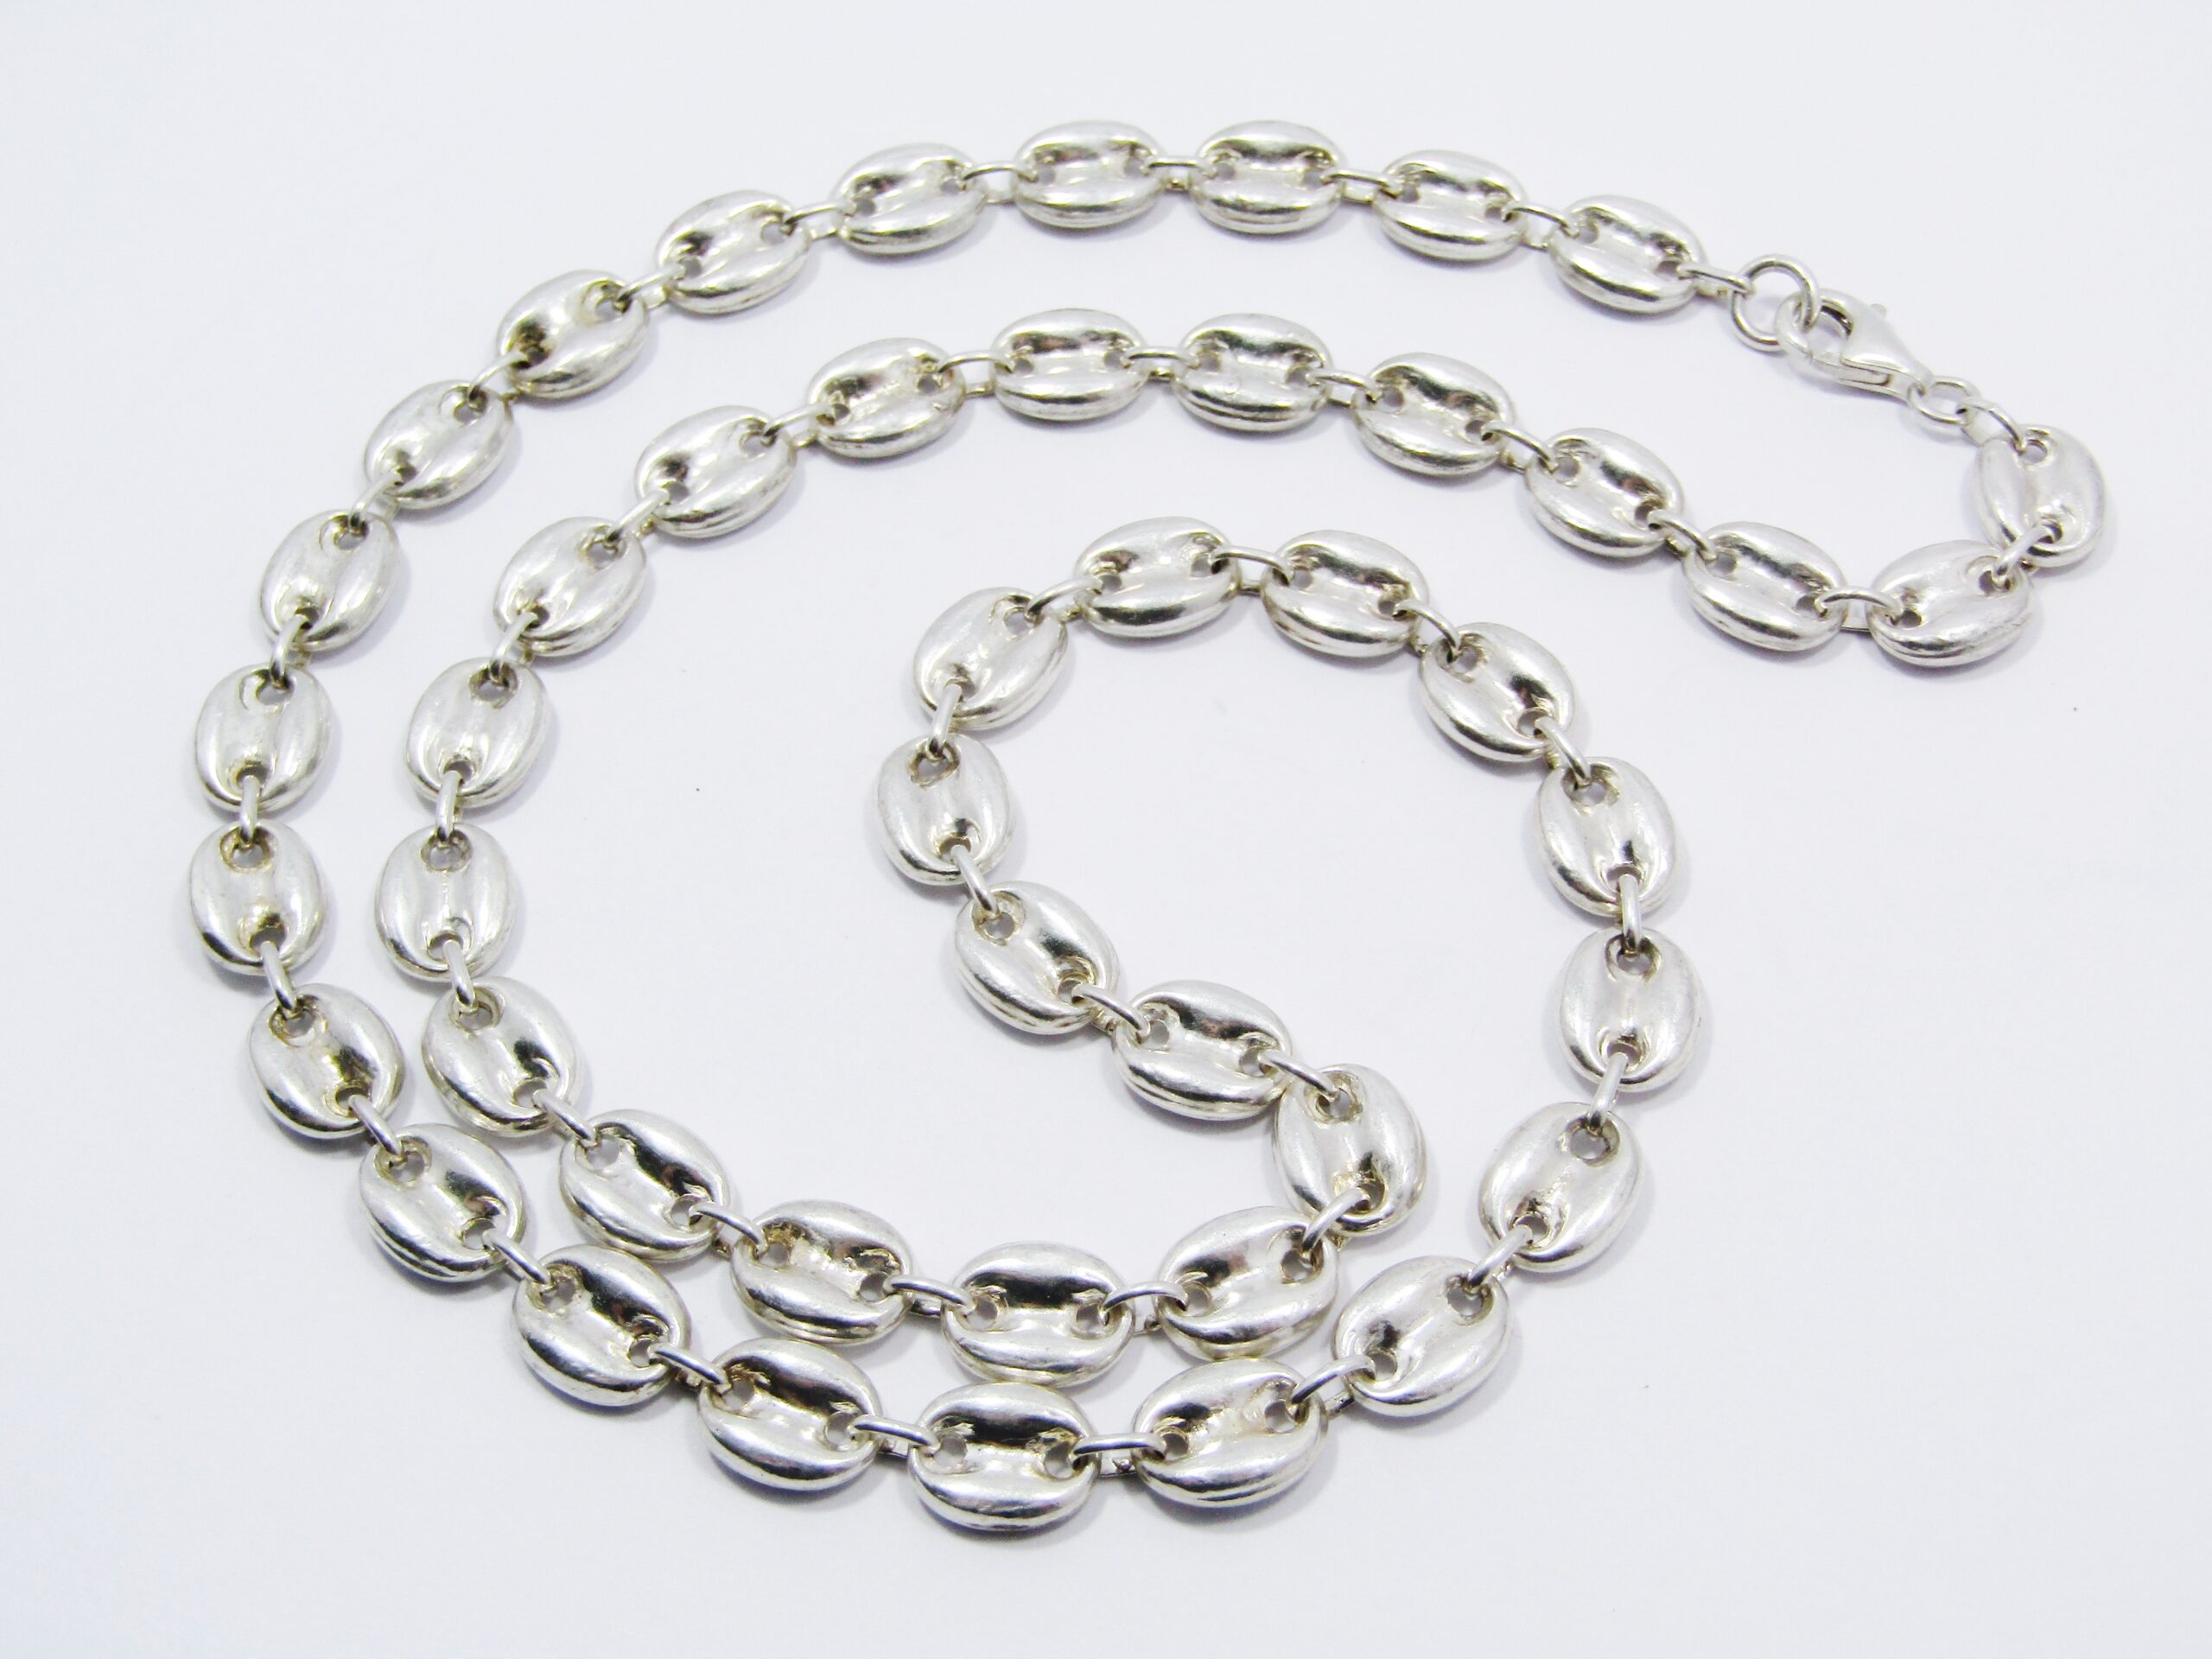 A Magnificent Chunky Gucci Link Necklace in Sterling Sterling Silver